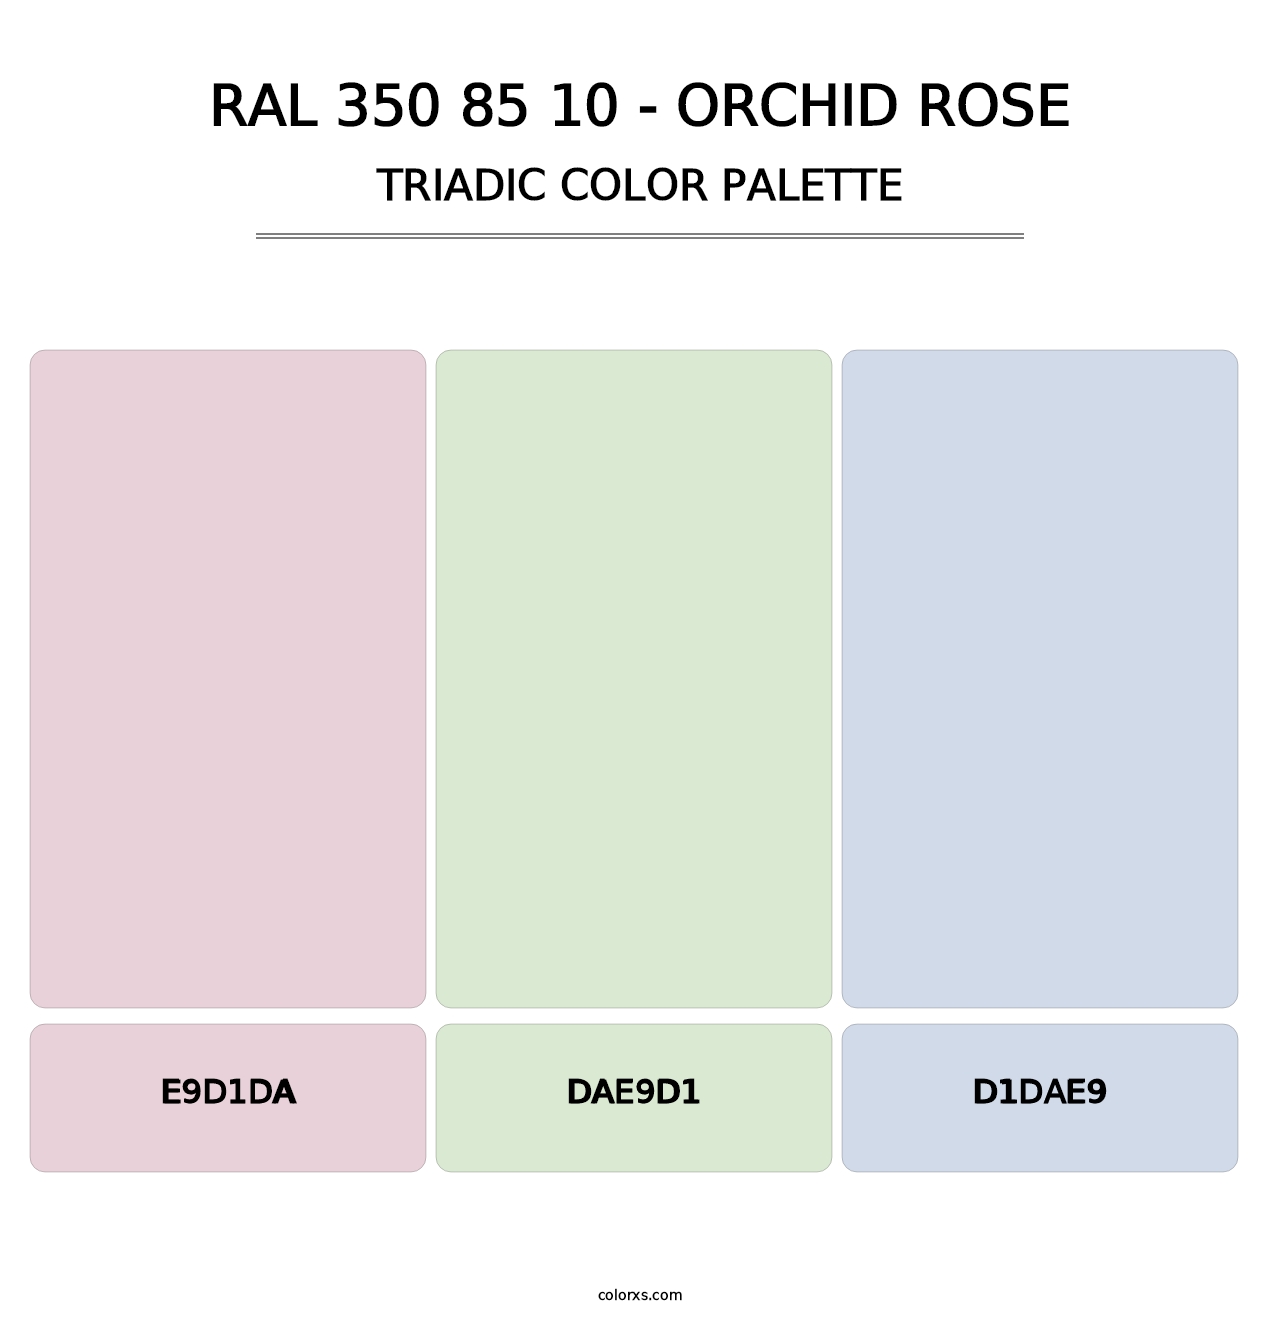 RAL 350 85 10 - Orchid Rose - Triadic Color Palette